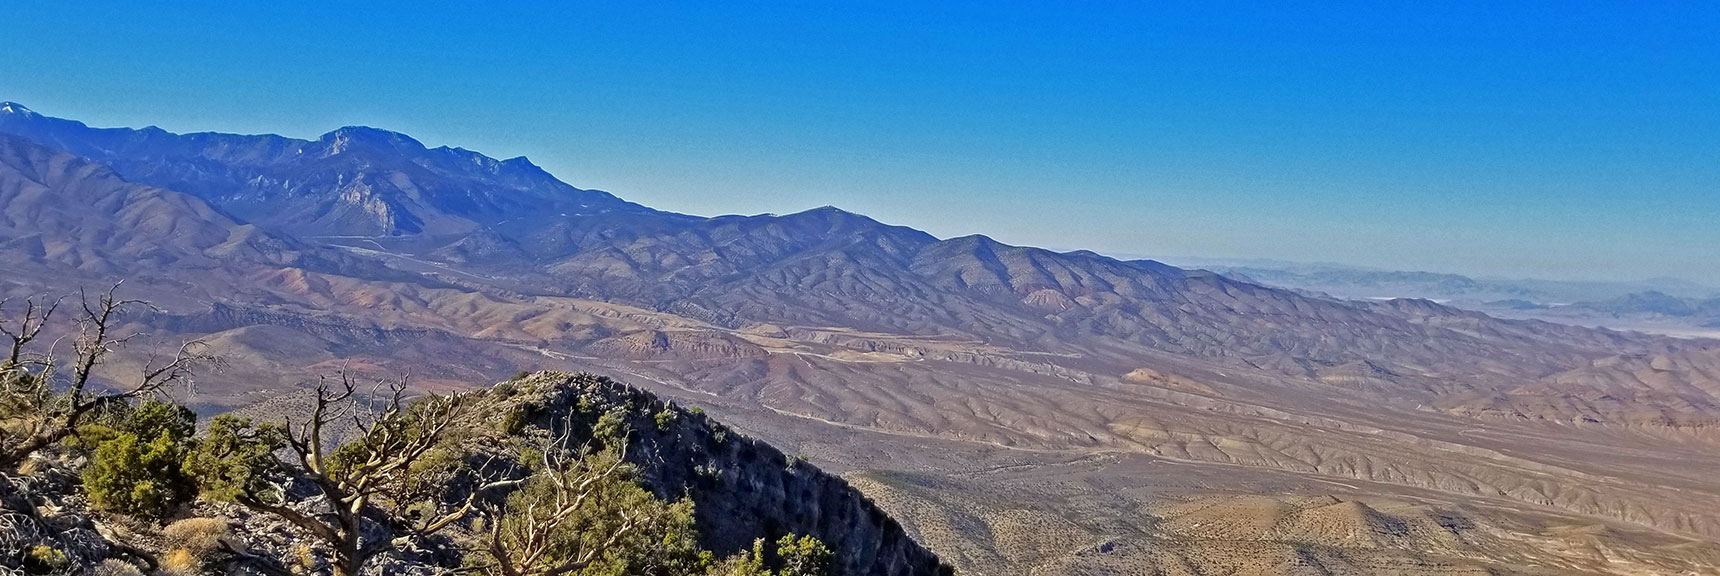 Summit View: Ridge Stretching Northeast of Mummy Mountain. Kyle Canyon in Foreground | La Madre Mountain,, El Padre Mountain, Burnt Peak | La Madre Mountains Wilderness, Nevada